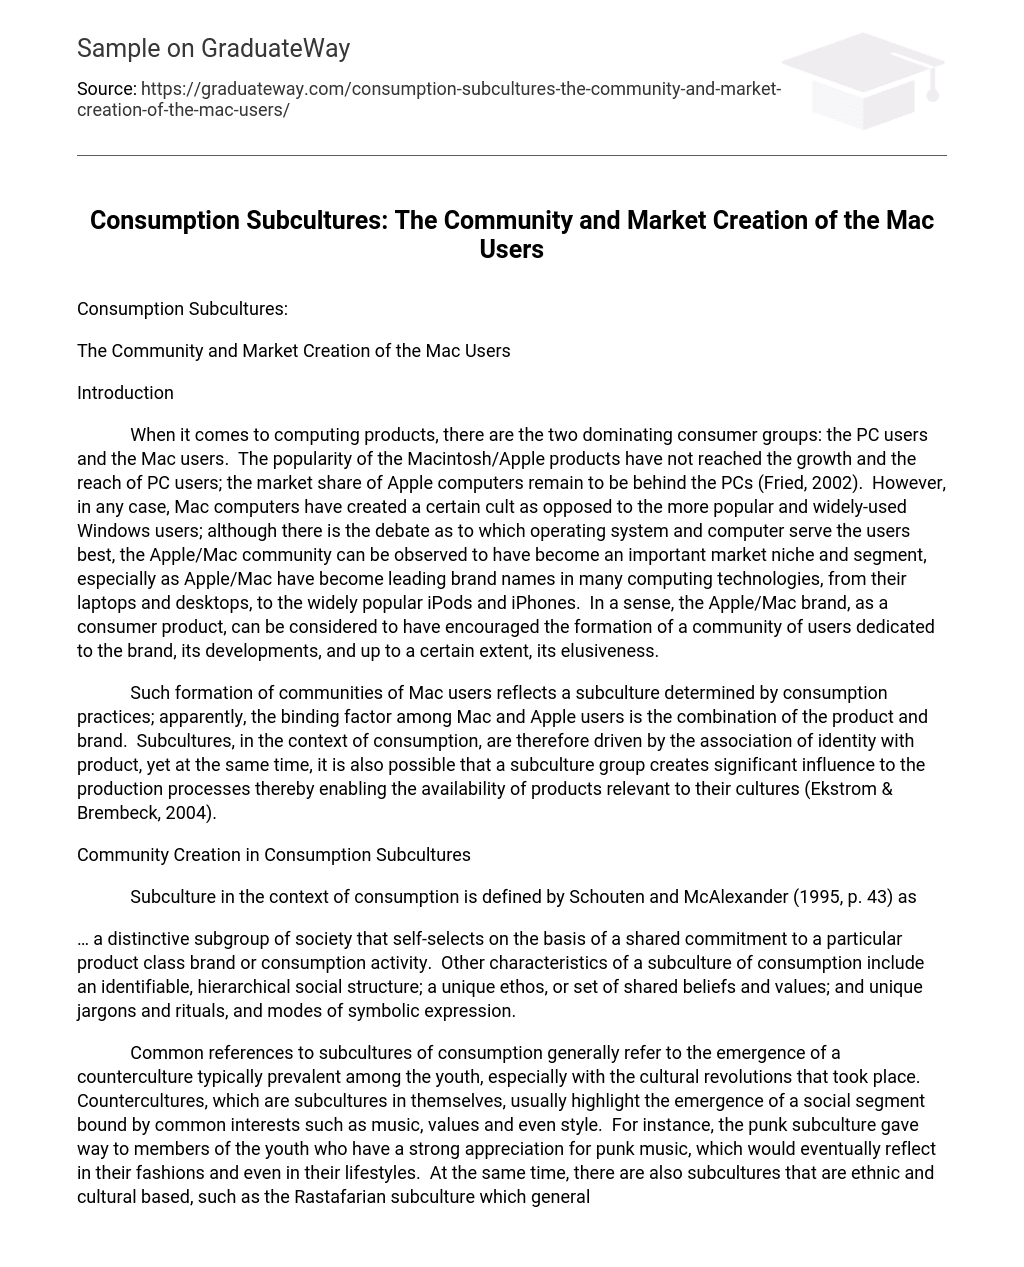 Consumption Subcultures: The Community and Market Creation of the Mac Users